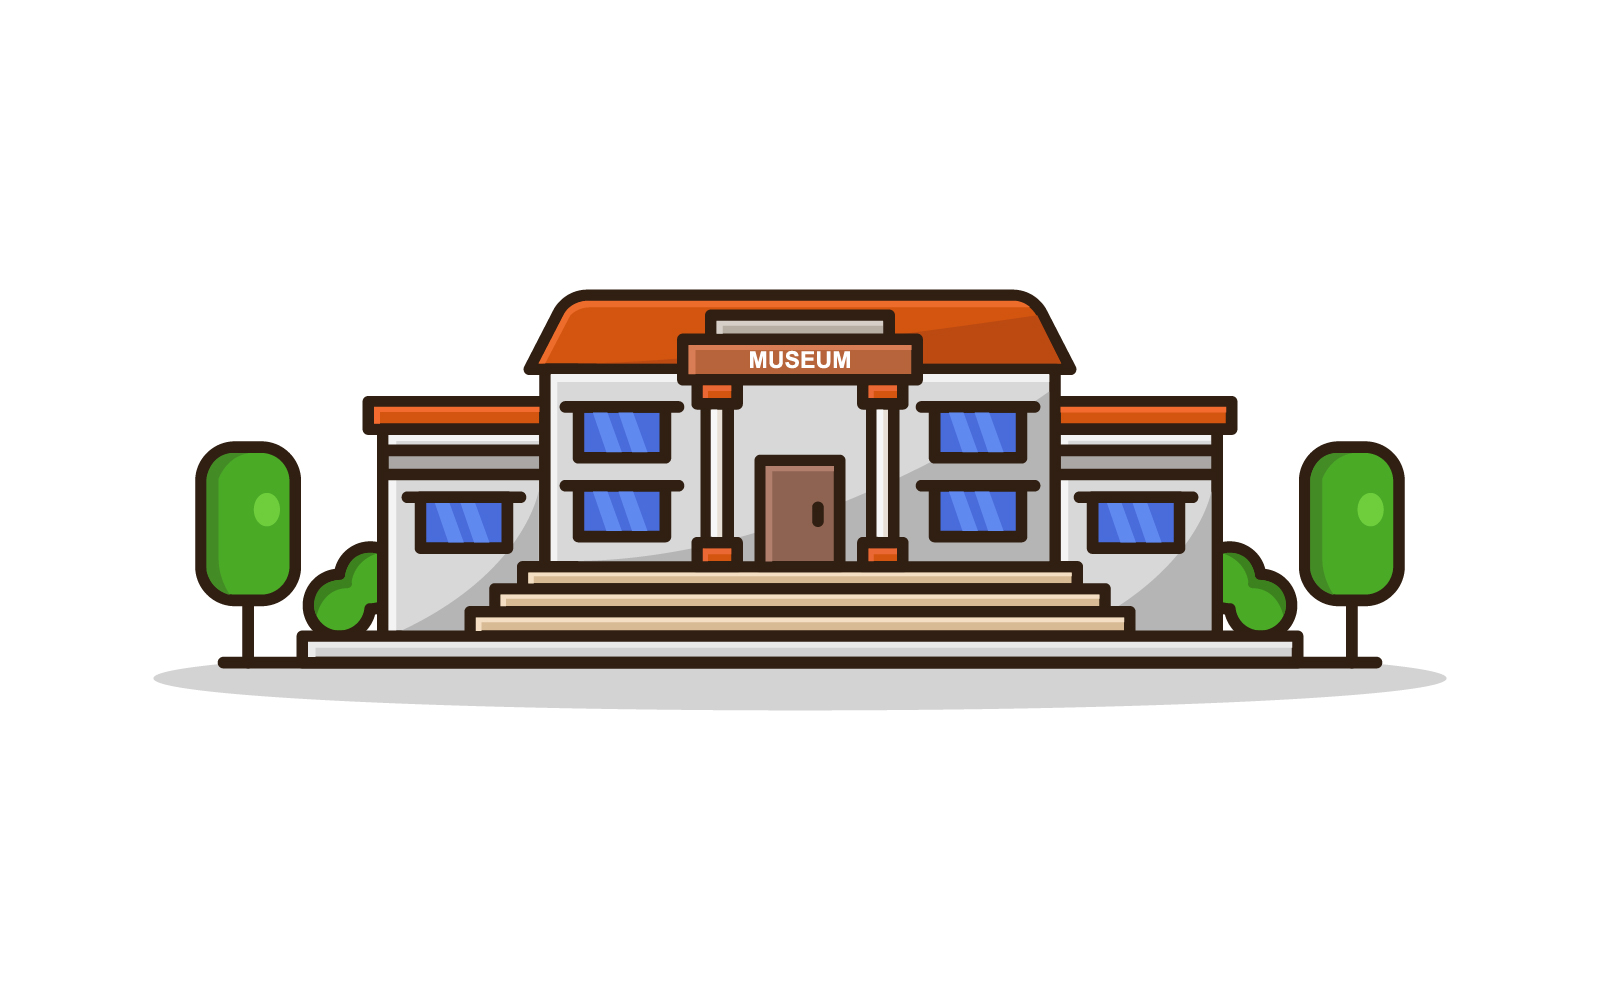 Museum illustrated in vector on a white background